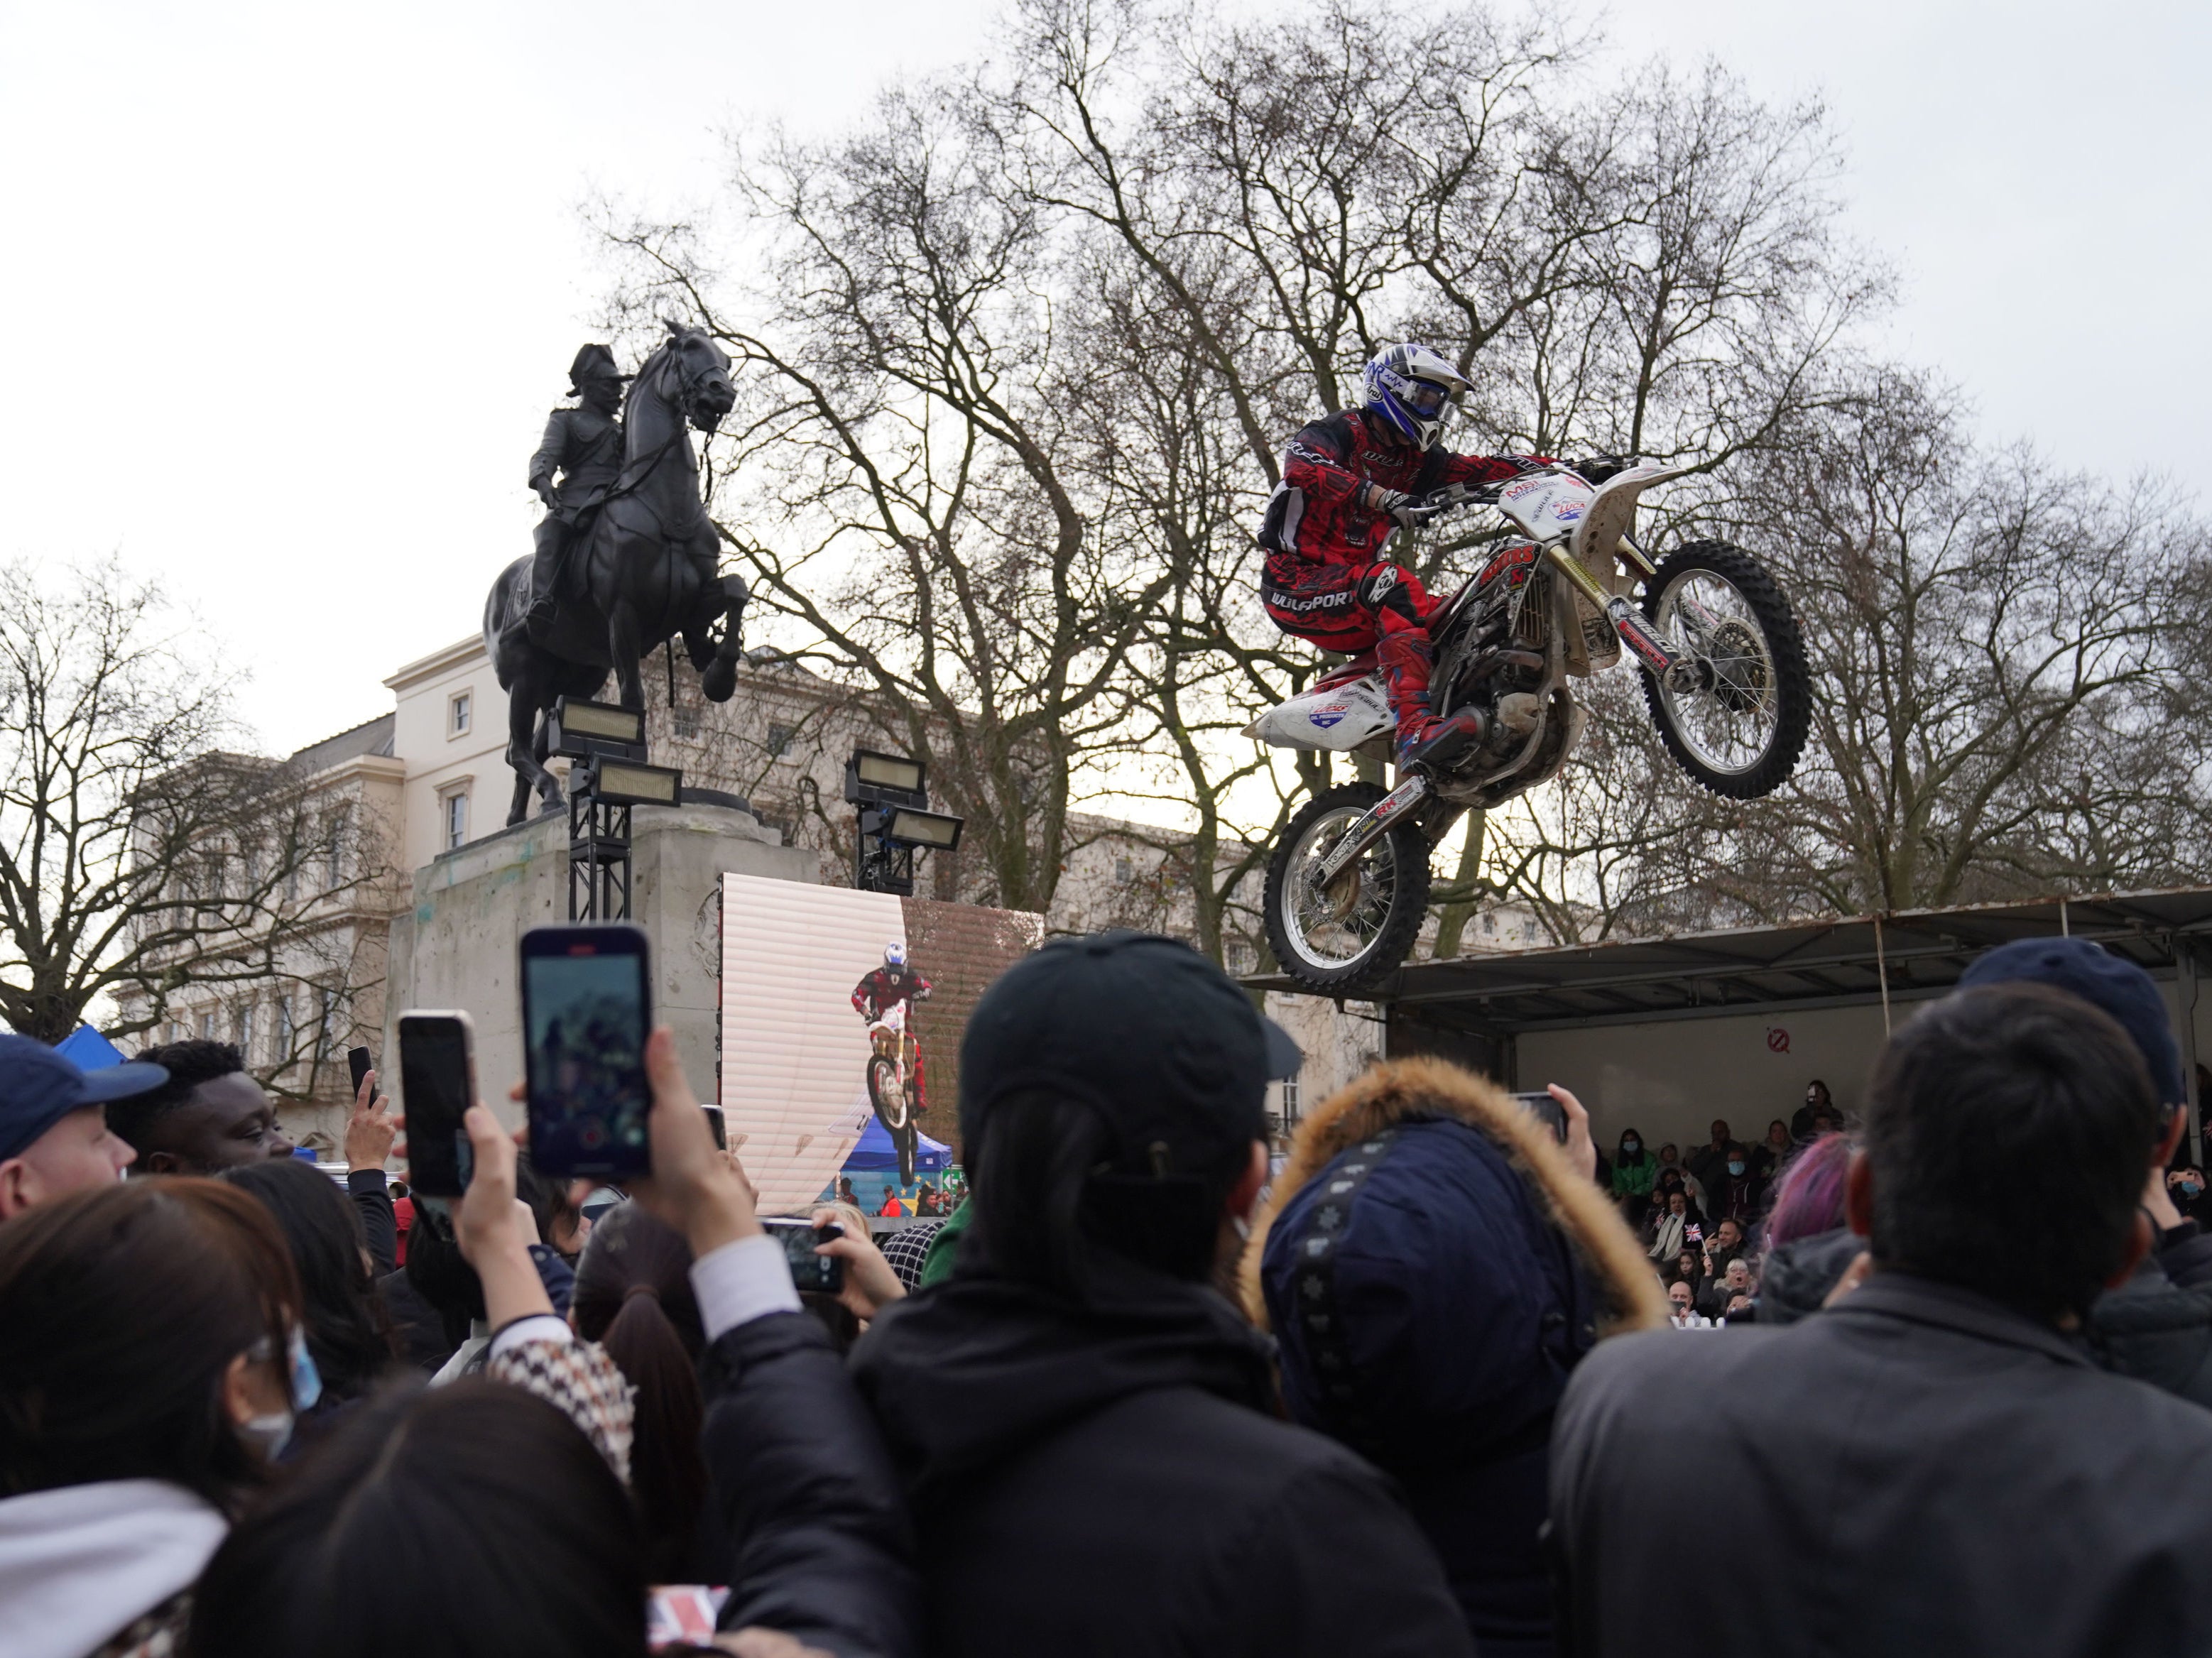 A motorcycle stunt team performs at London’s New Year’s Day parade in Waterloo Place, London